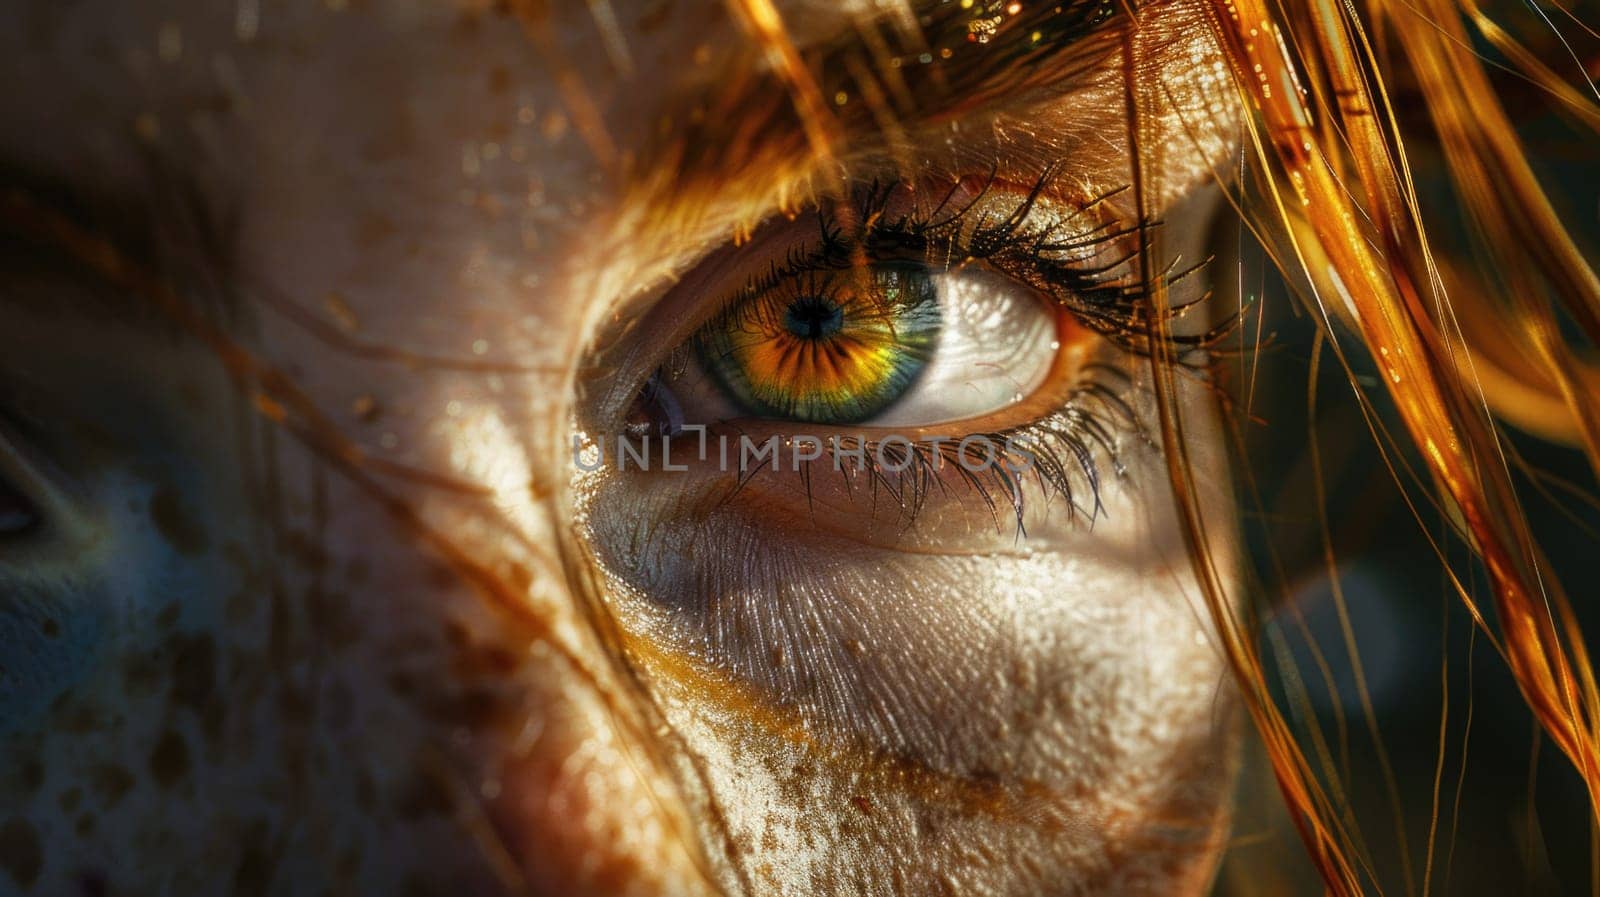 Womans Face Close-Up With Long Hair by but_photo